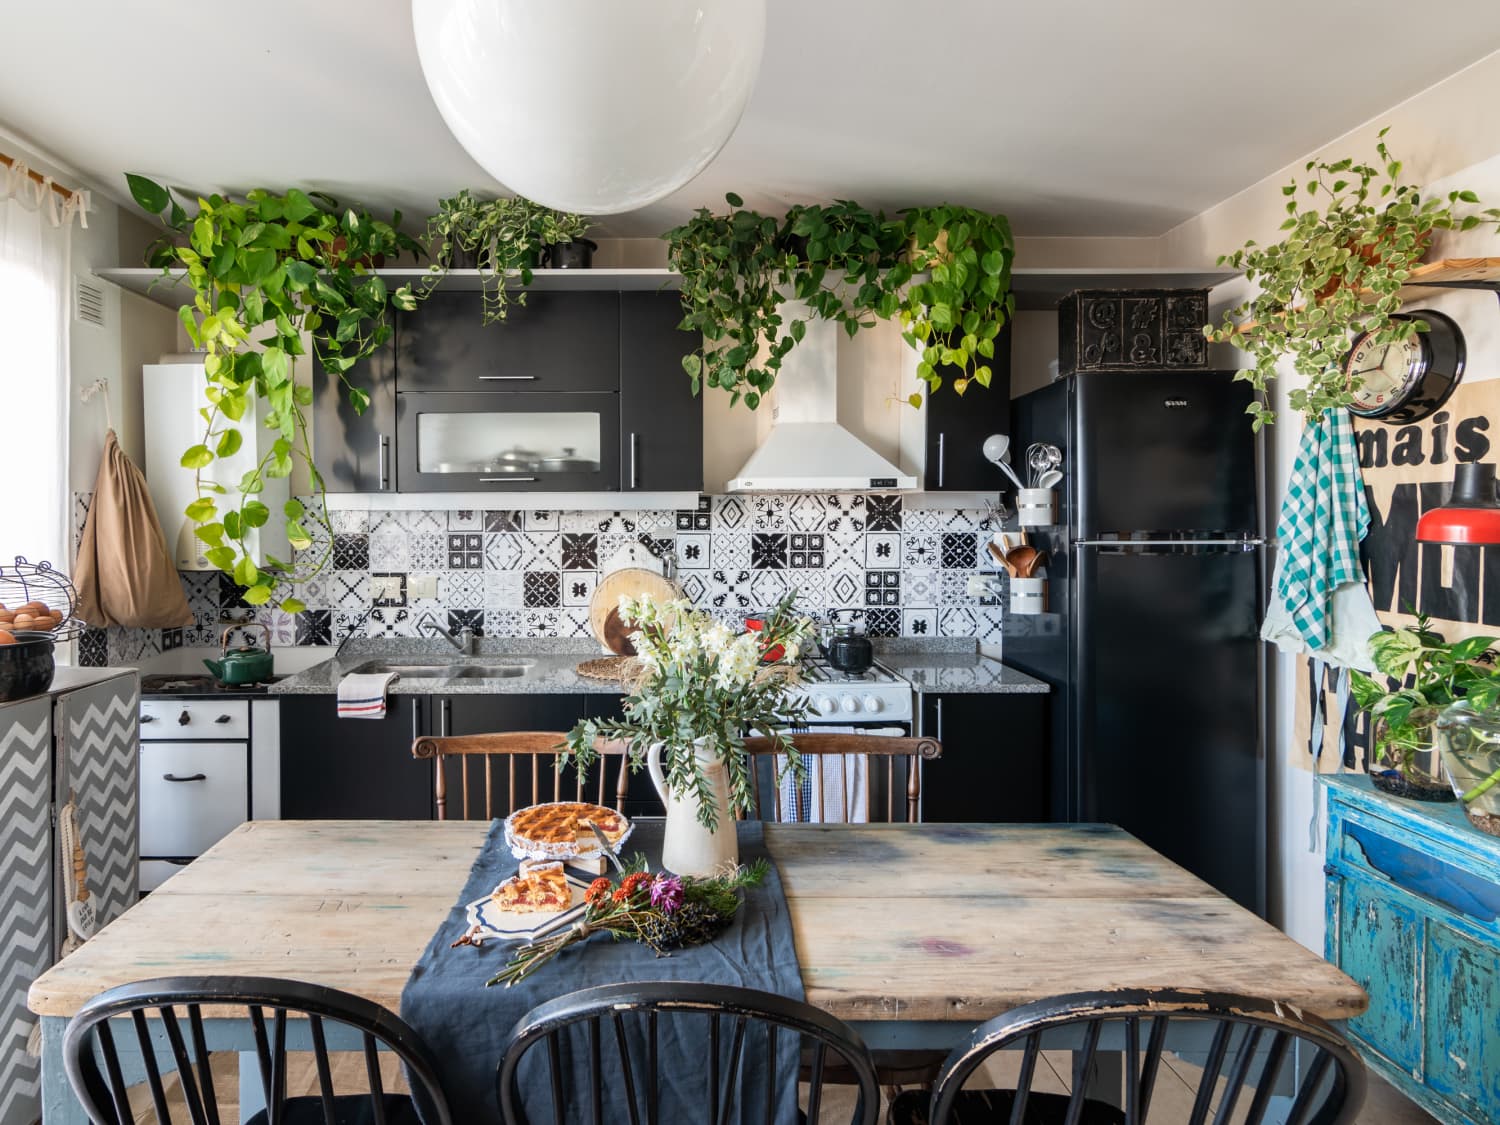 bohemian kitchen inspirations: plants, patterns, and more